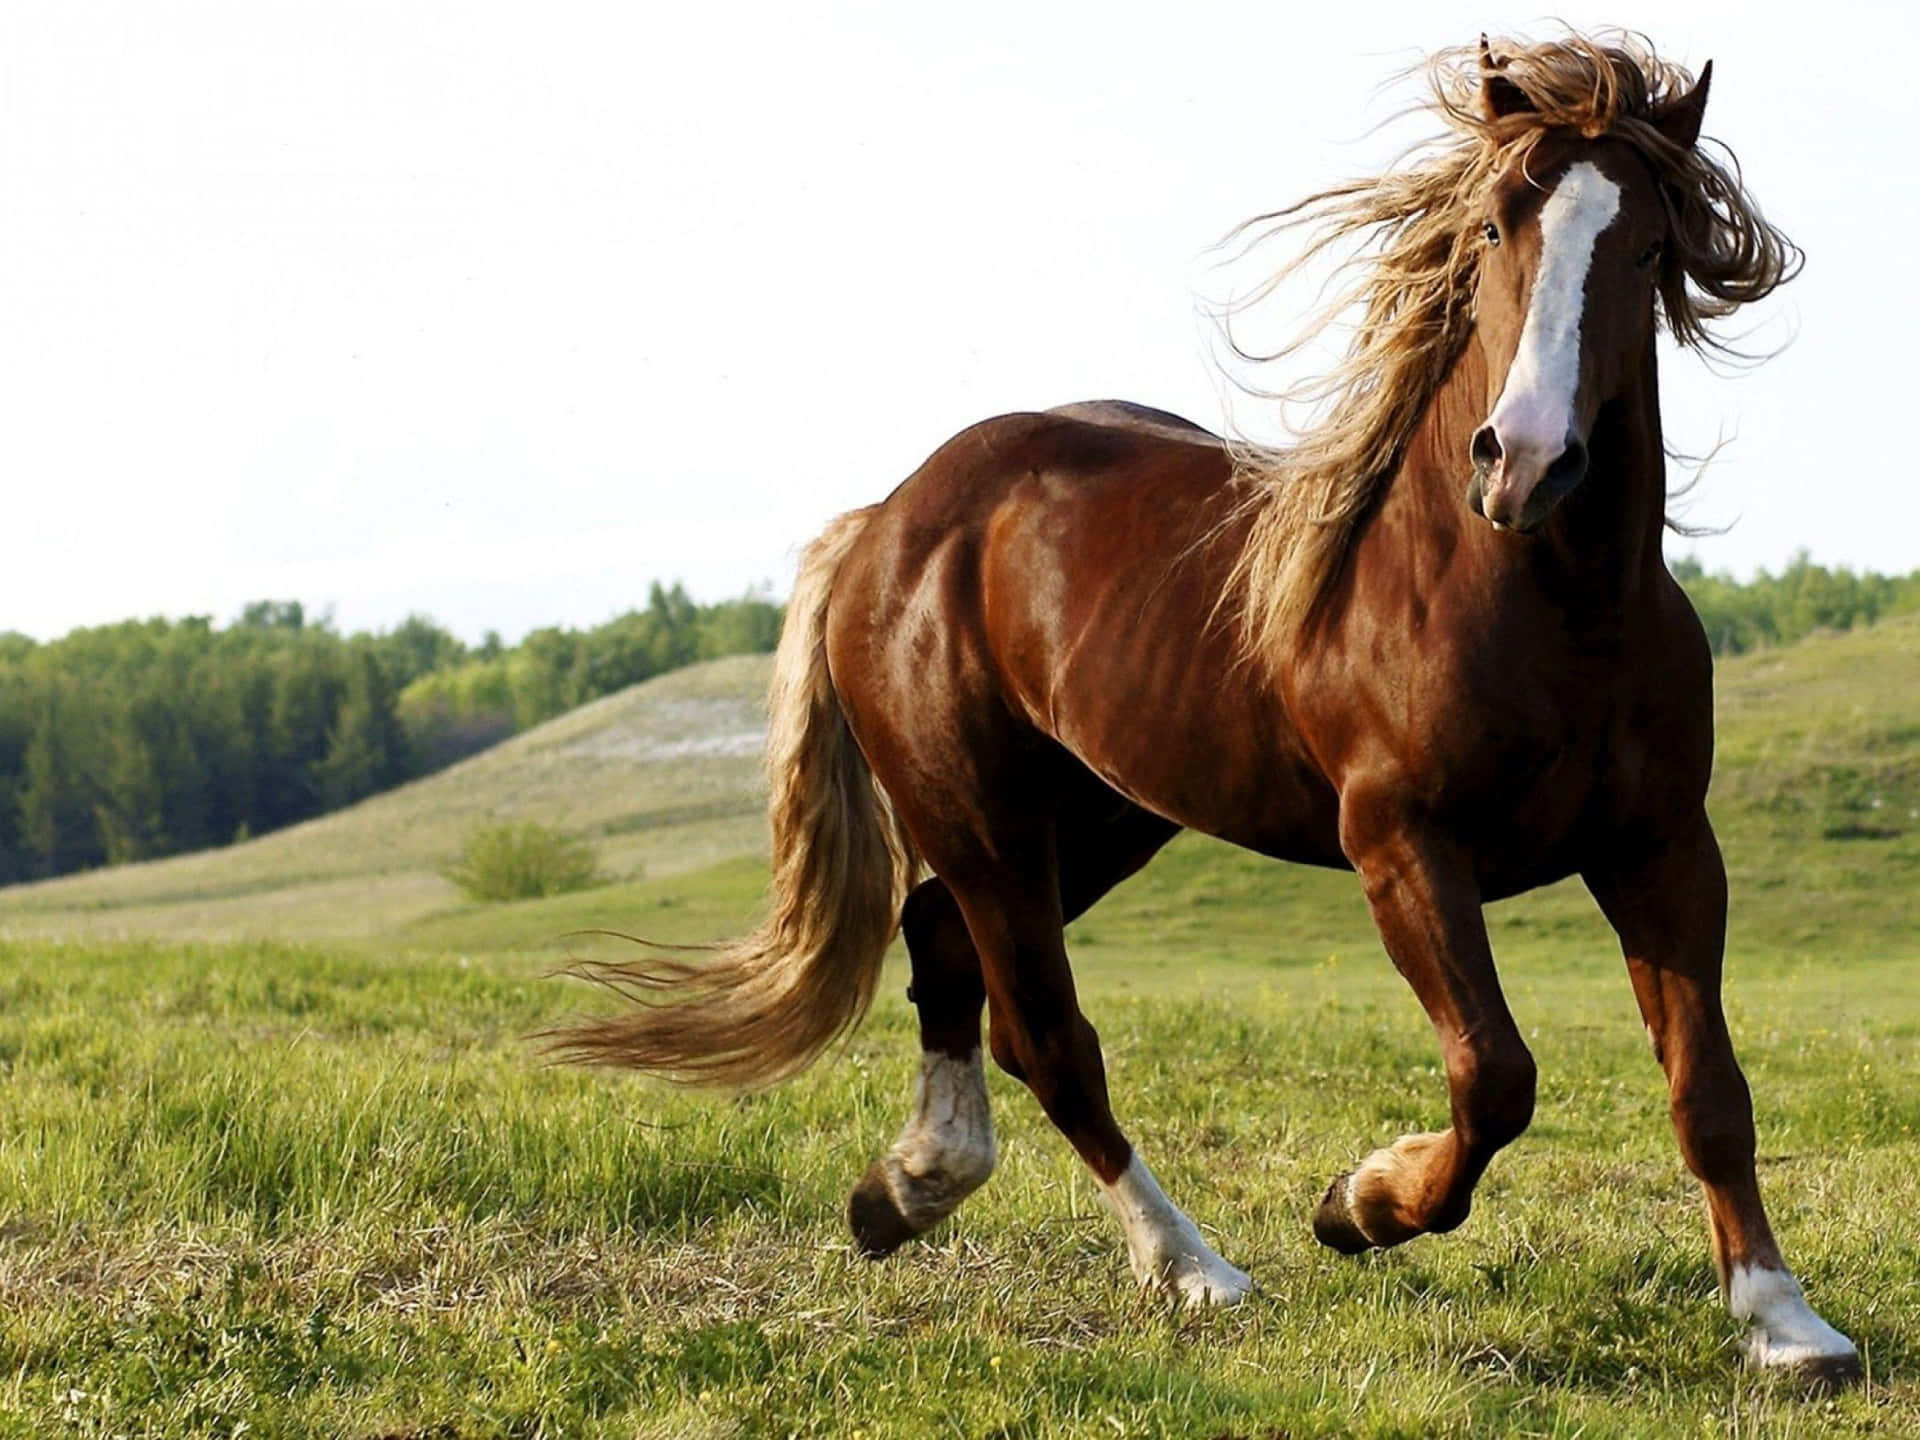 A galloping horse surrounded by a field of tall grass